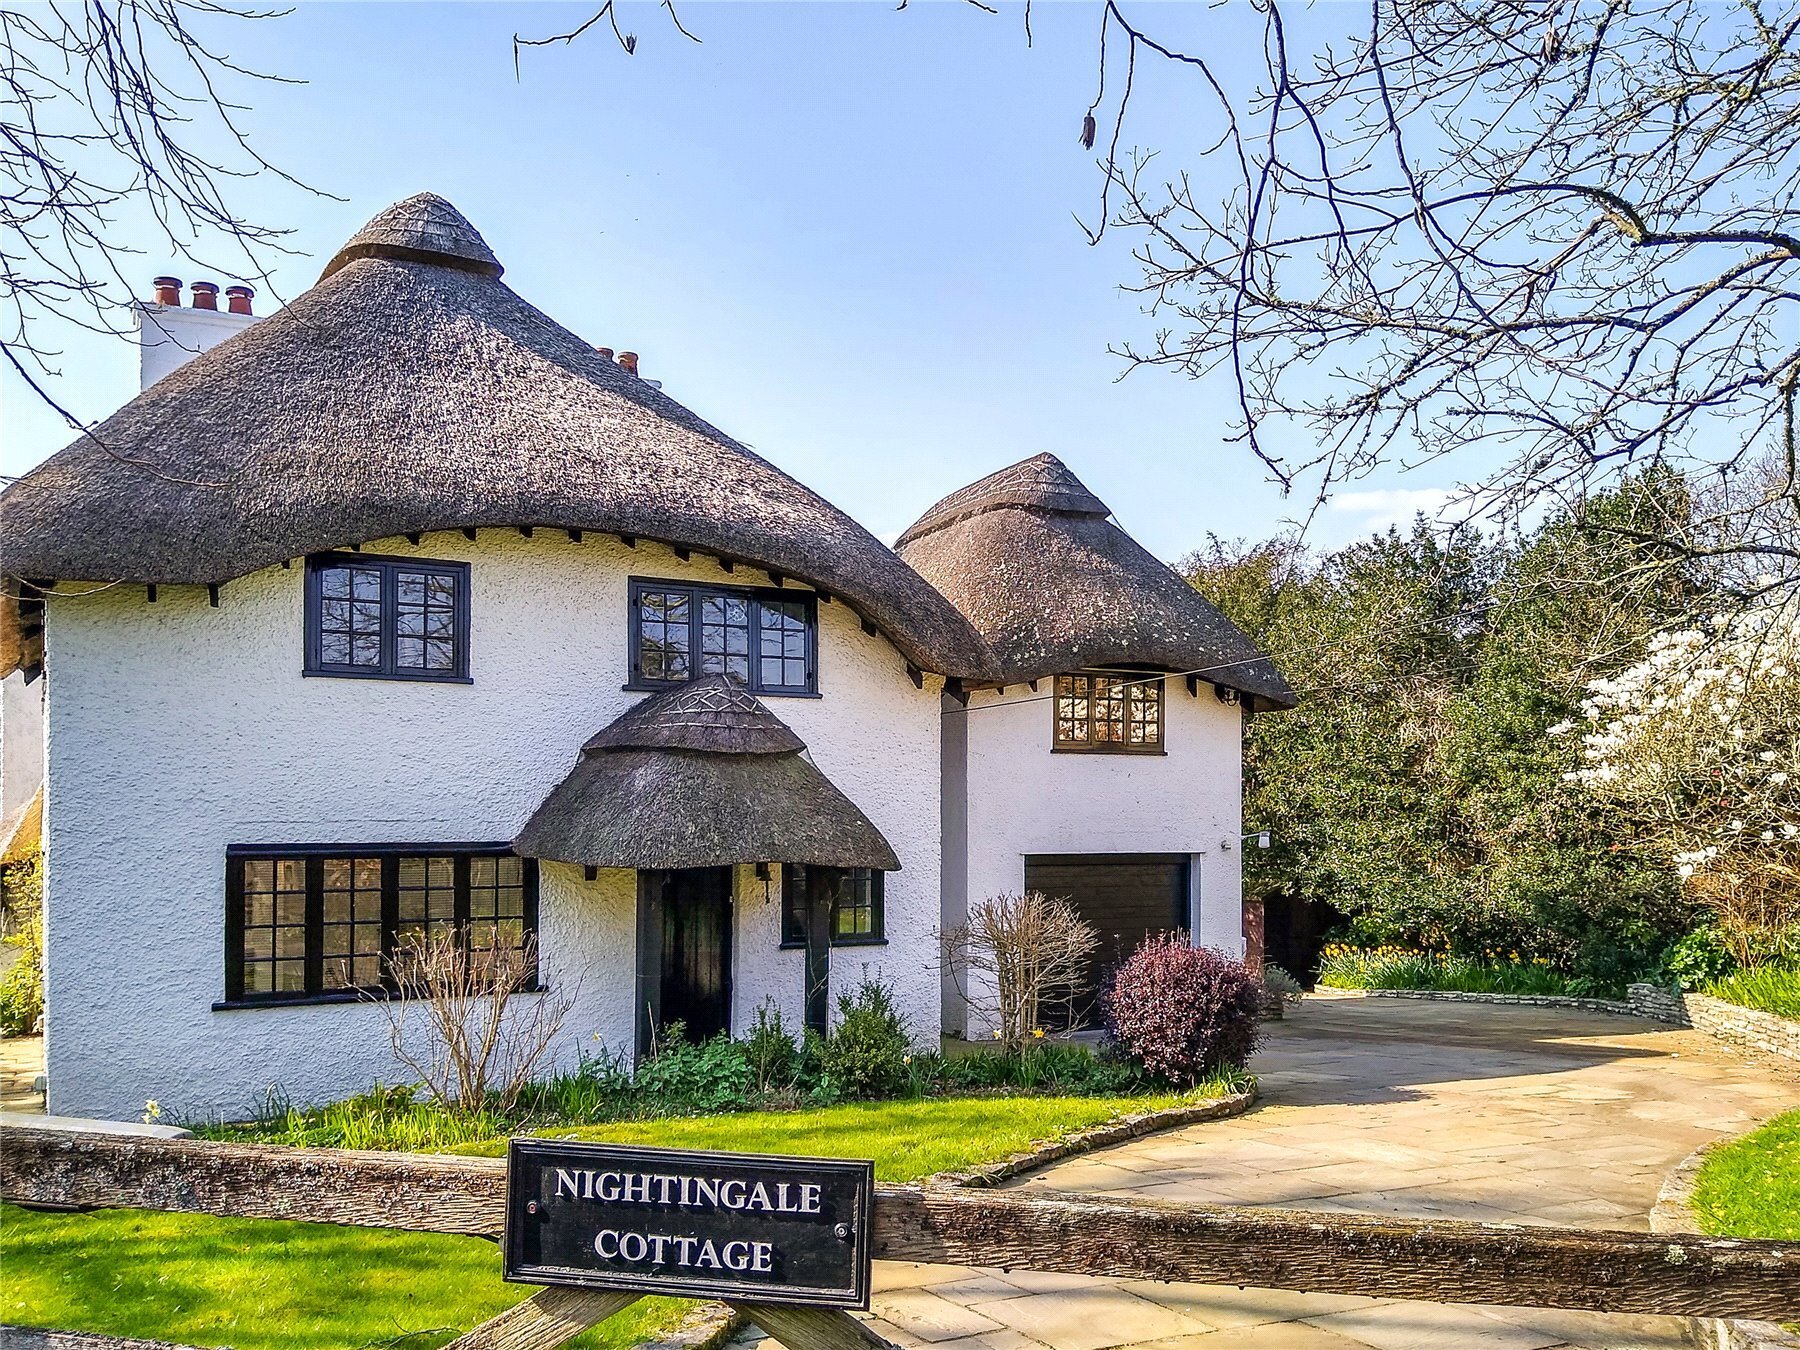 a-delightful-17th-century-thatched-cottage-for-sale-in-a-magical-corner-of-the-new-forest